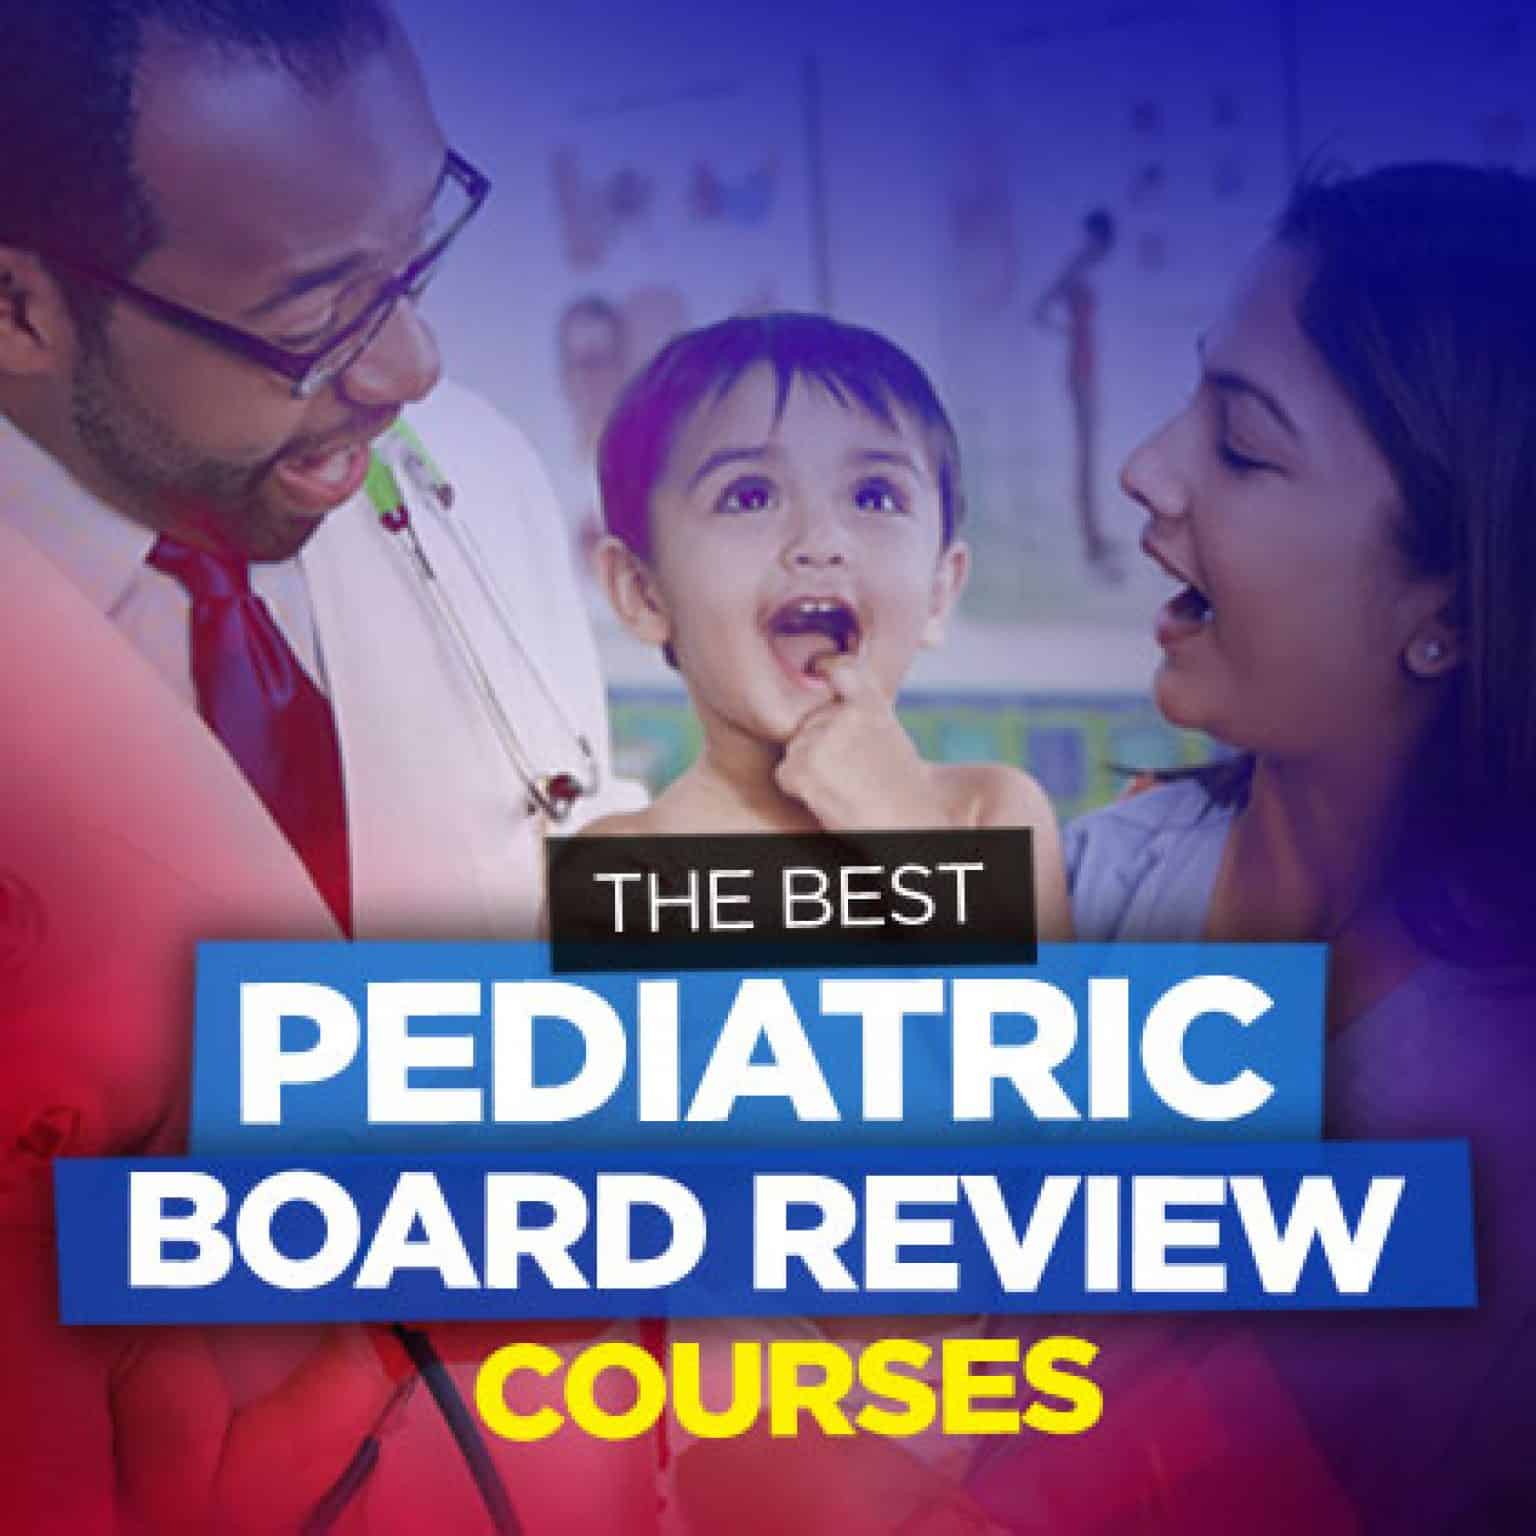 Best Pediatric Board Review Courses Crush Your Exam!